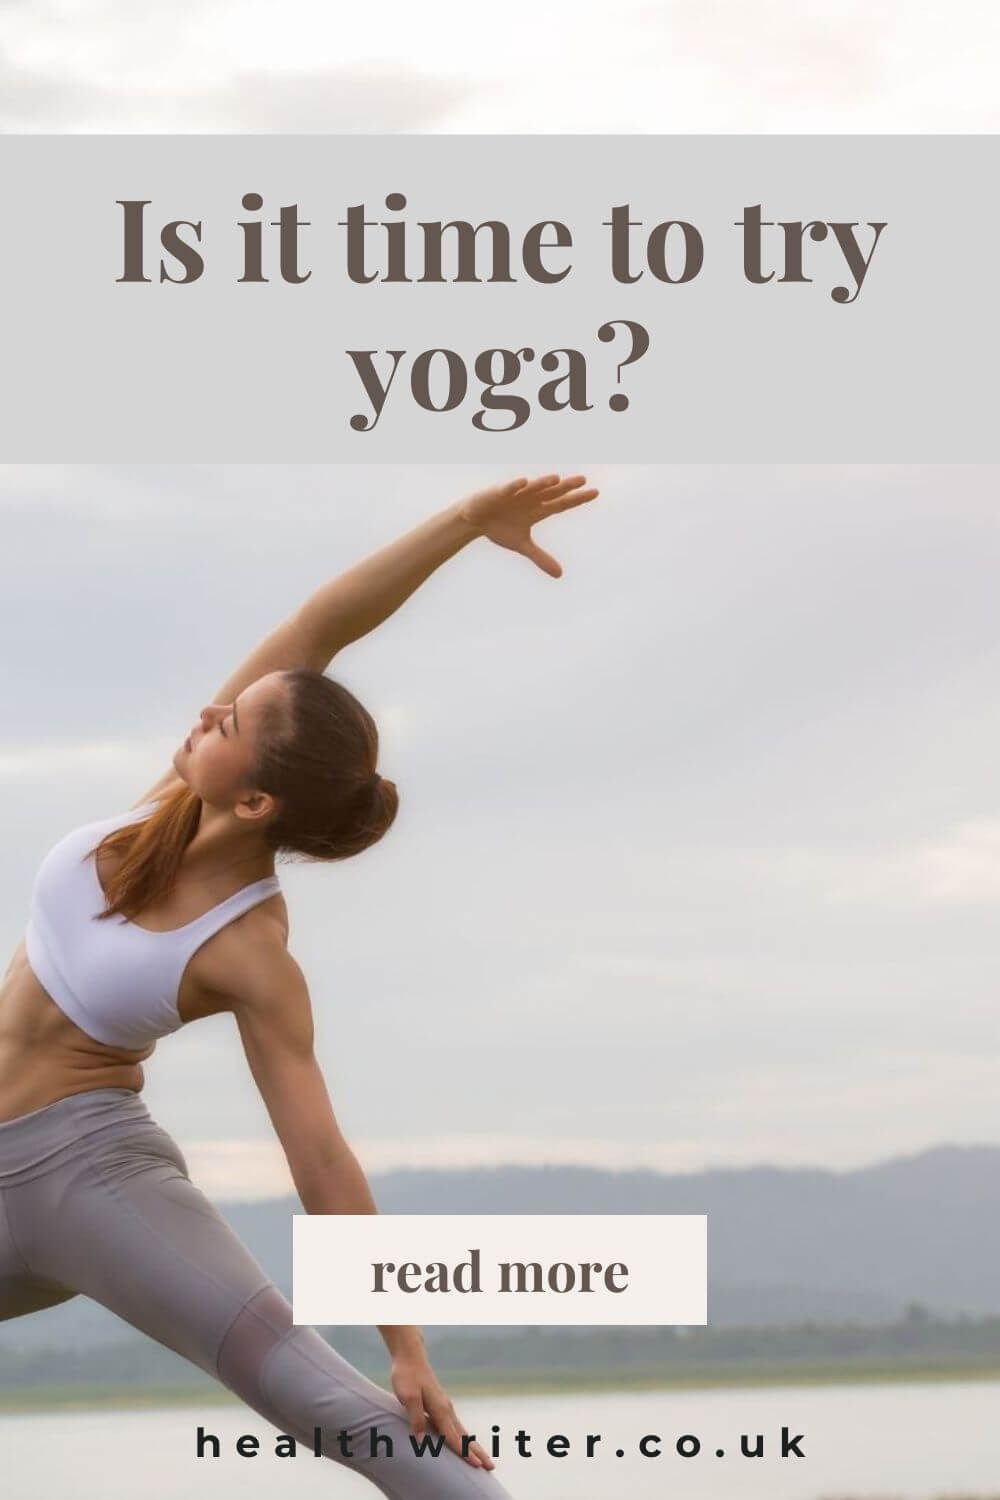 Time to try yoga?